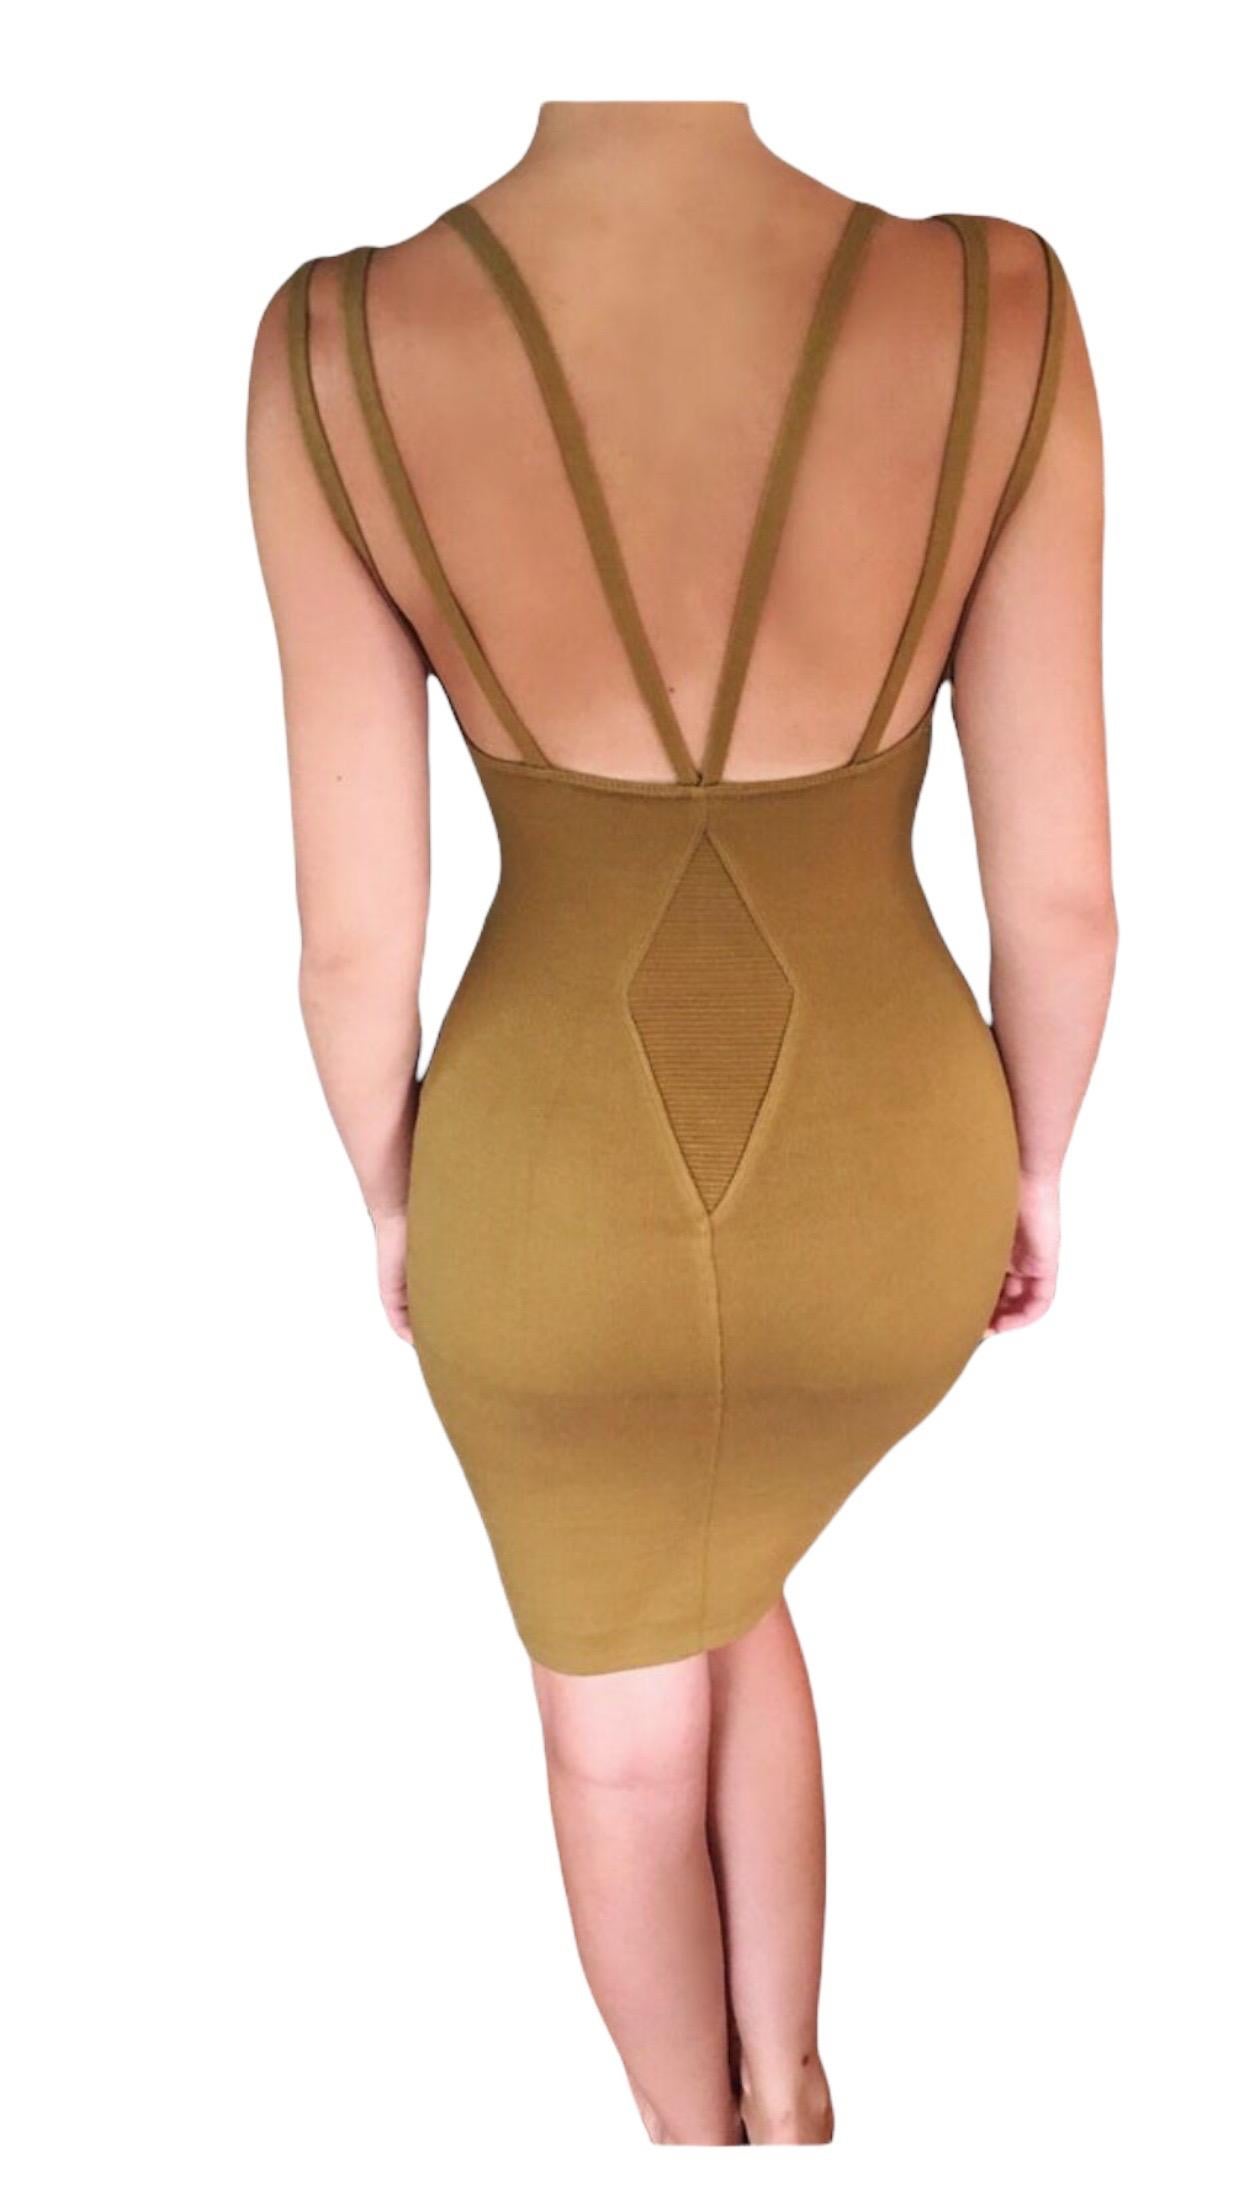 Azzedine Alaia S/S 1990 Vintage Fitted Plunged Décolleté Open Back Mini Dress Size M


All Eyes on Alaïa

For the last half-century, the world’s most fashionable and adventuresome women have turned to Azzedine Alaïa for body-enhancing clothes that